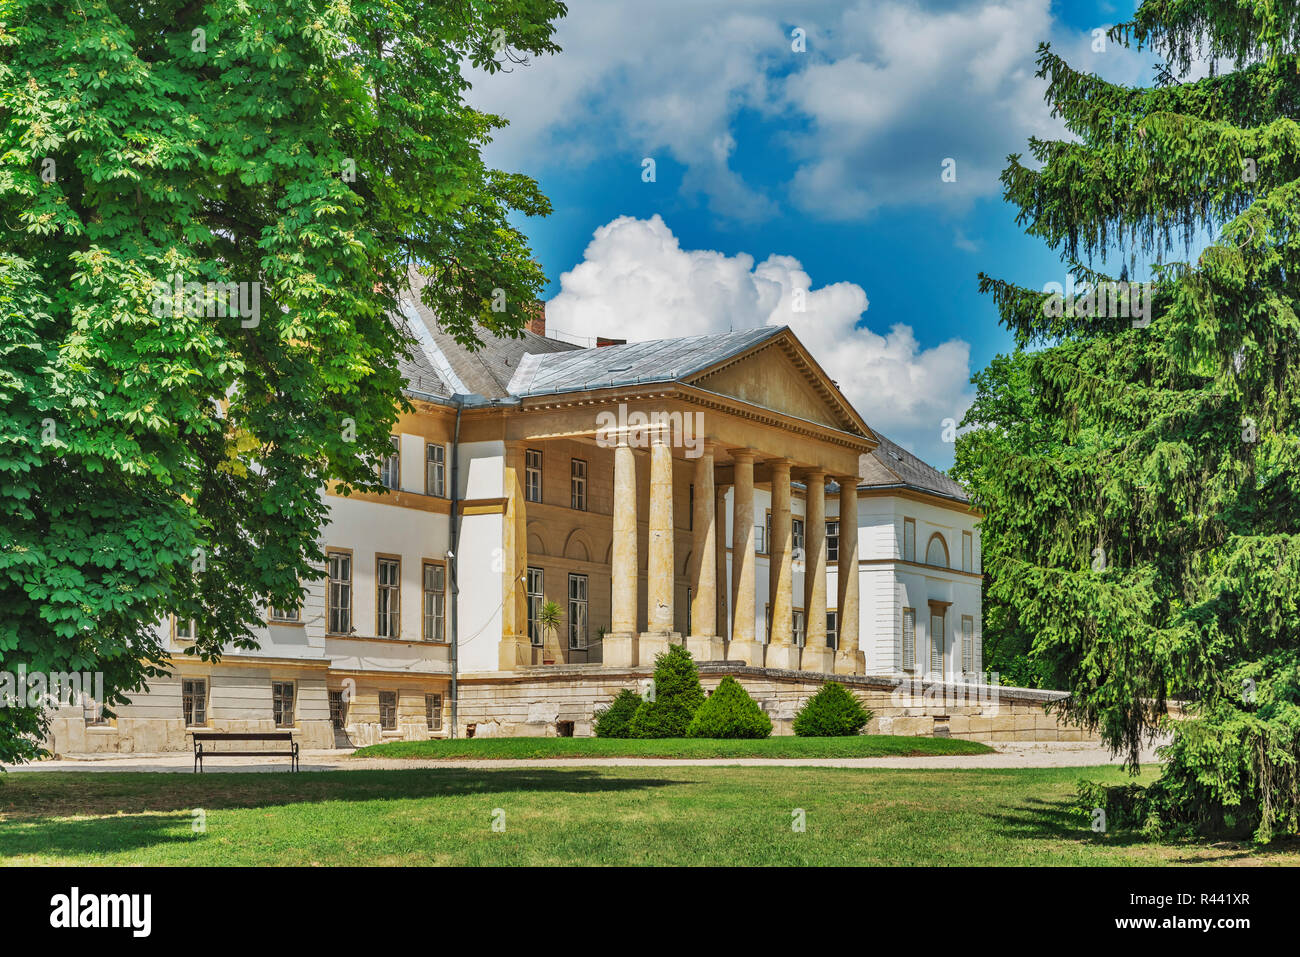 The Palais Festetics is located in Deg, Enying, Fejer county, Central Transdanubia, Hungary, Europe Stock Photo